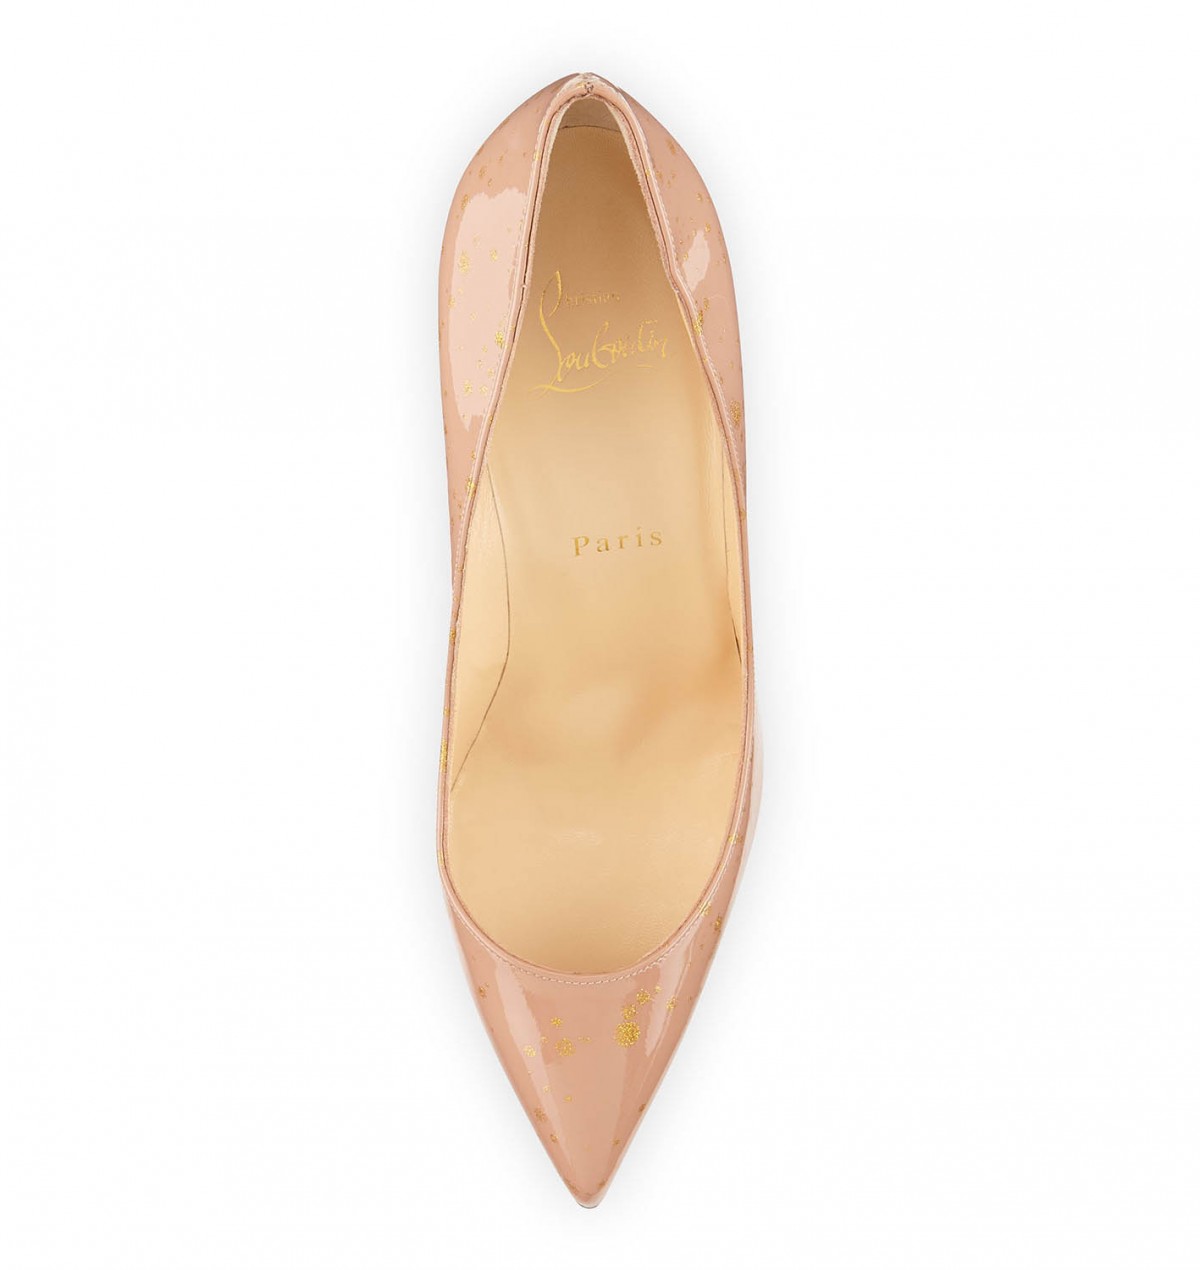 Christian Louboutin Pigalles Follies Red Sole Pump Nude Gold Shoes Post